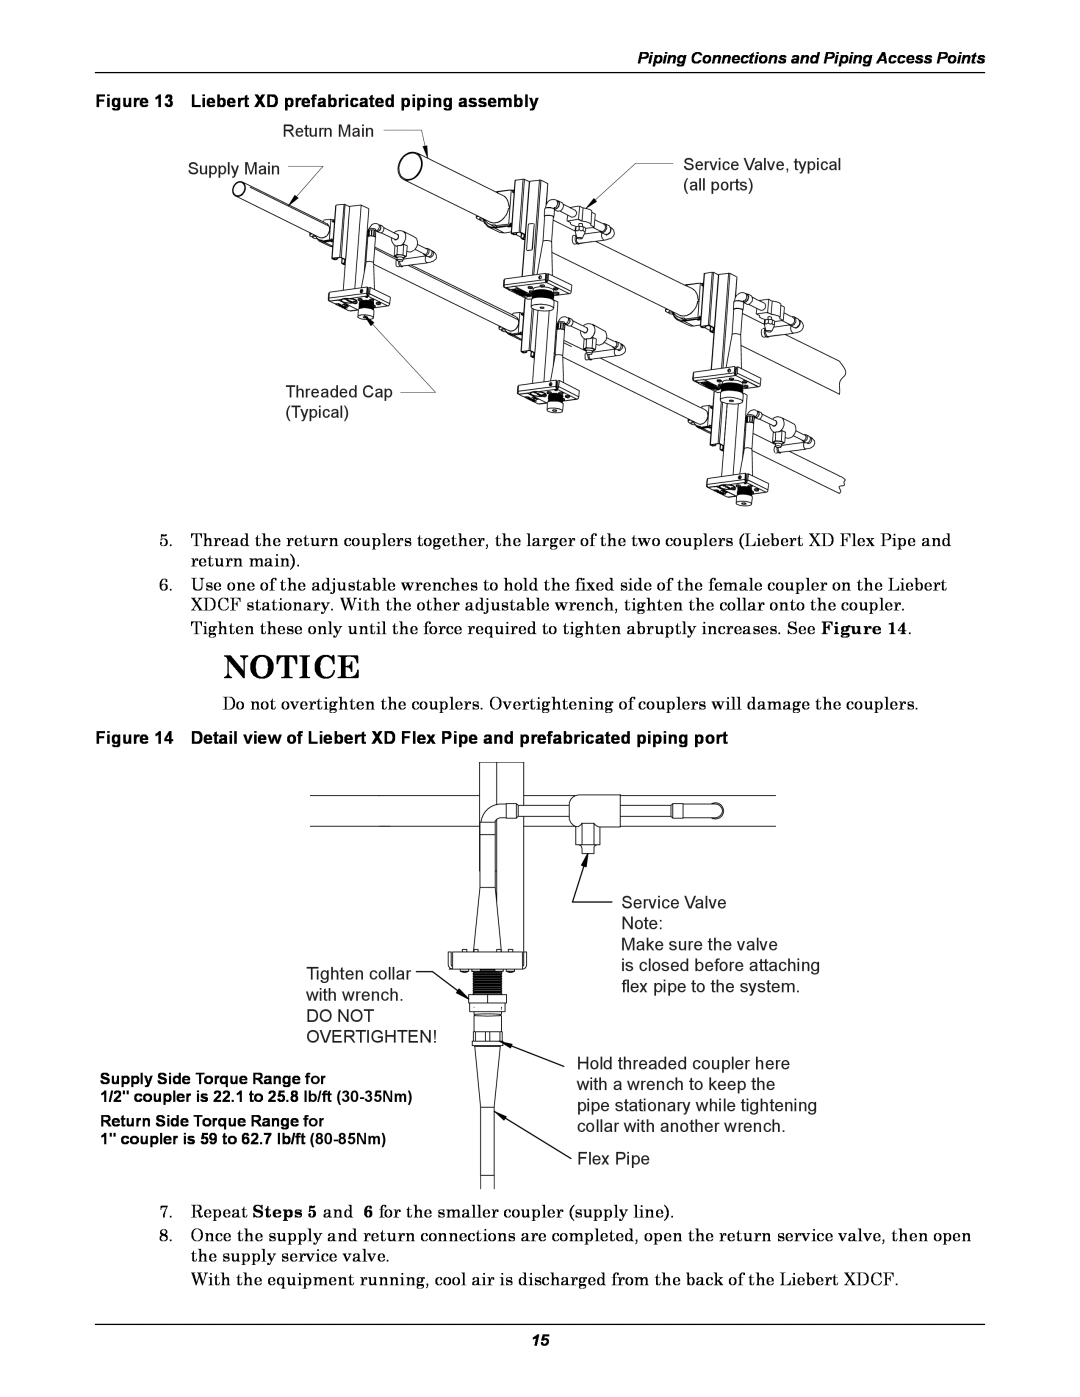 Emerson XDCF user manual Liebert XD prefabricated piping assembly 